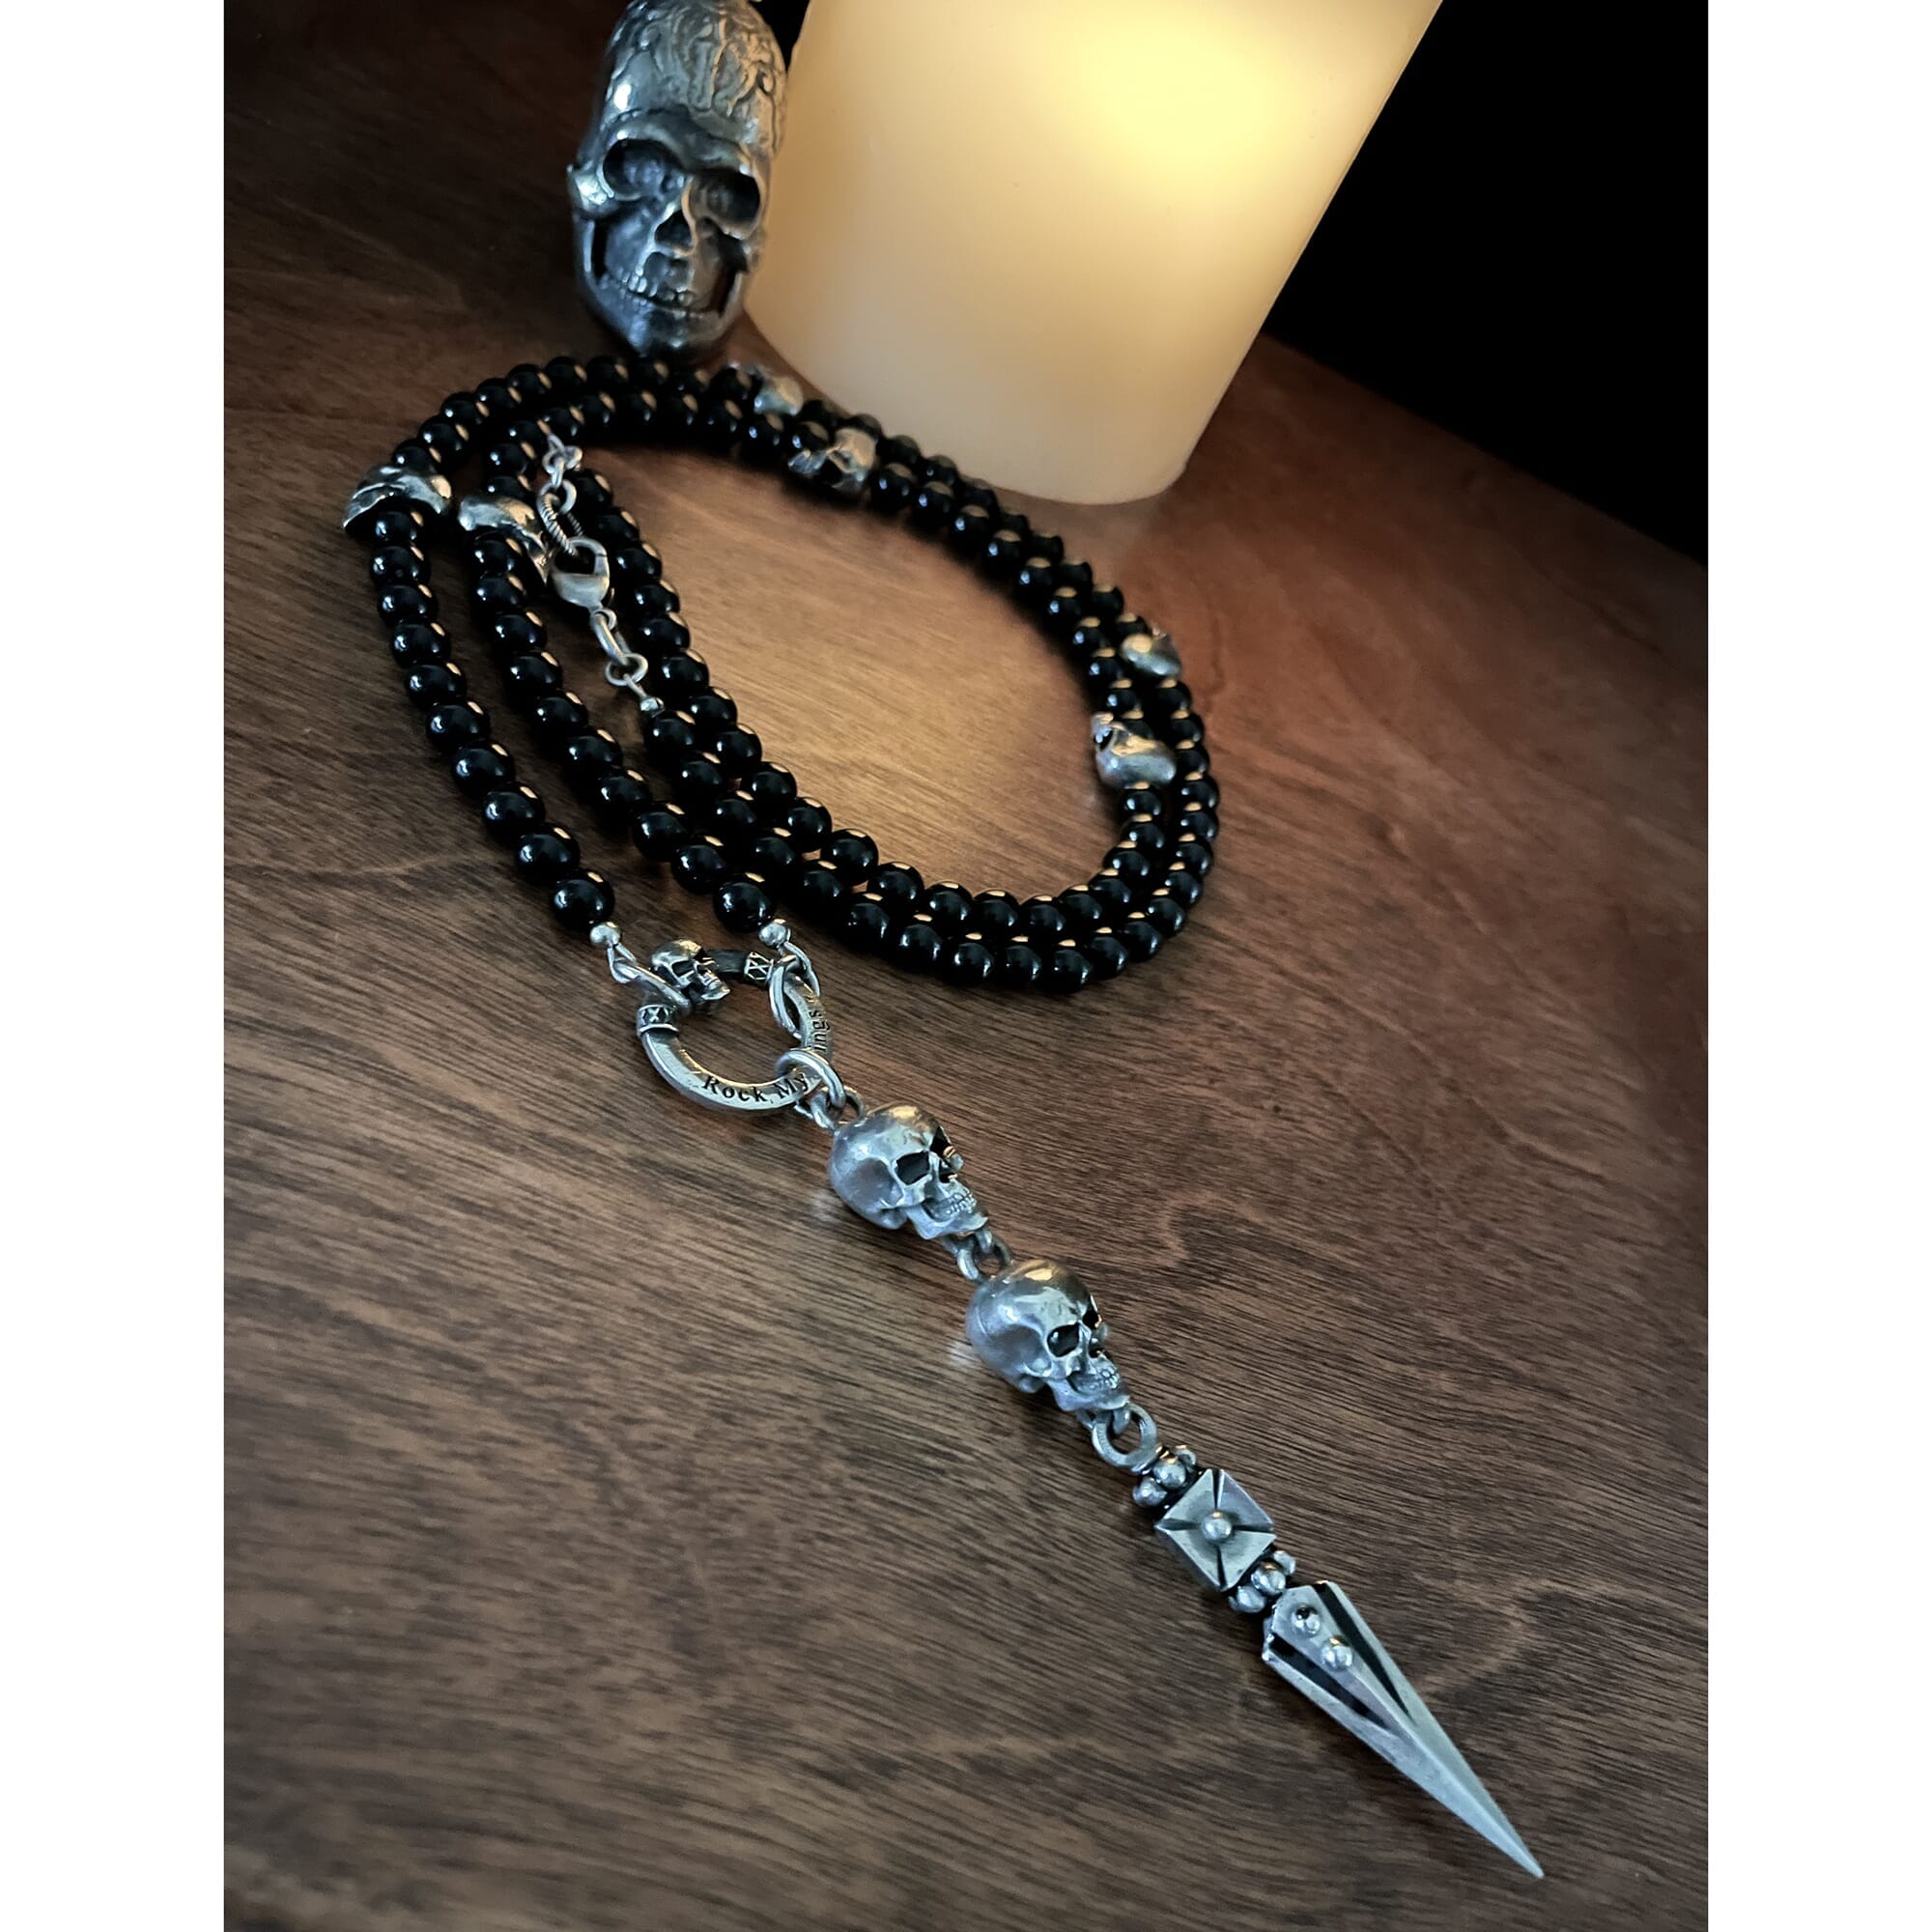 Unleash Your Dark Side with this Skull and Dagger Beaded Rosary Necklace by Rock My Wings